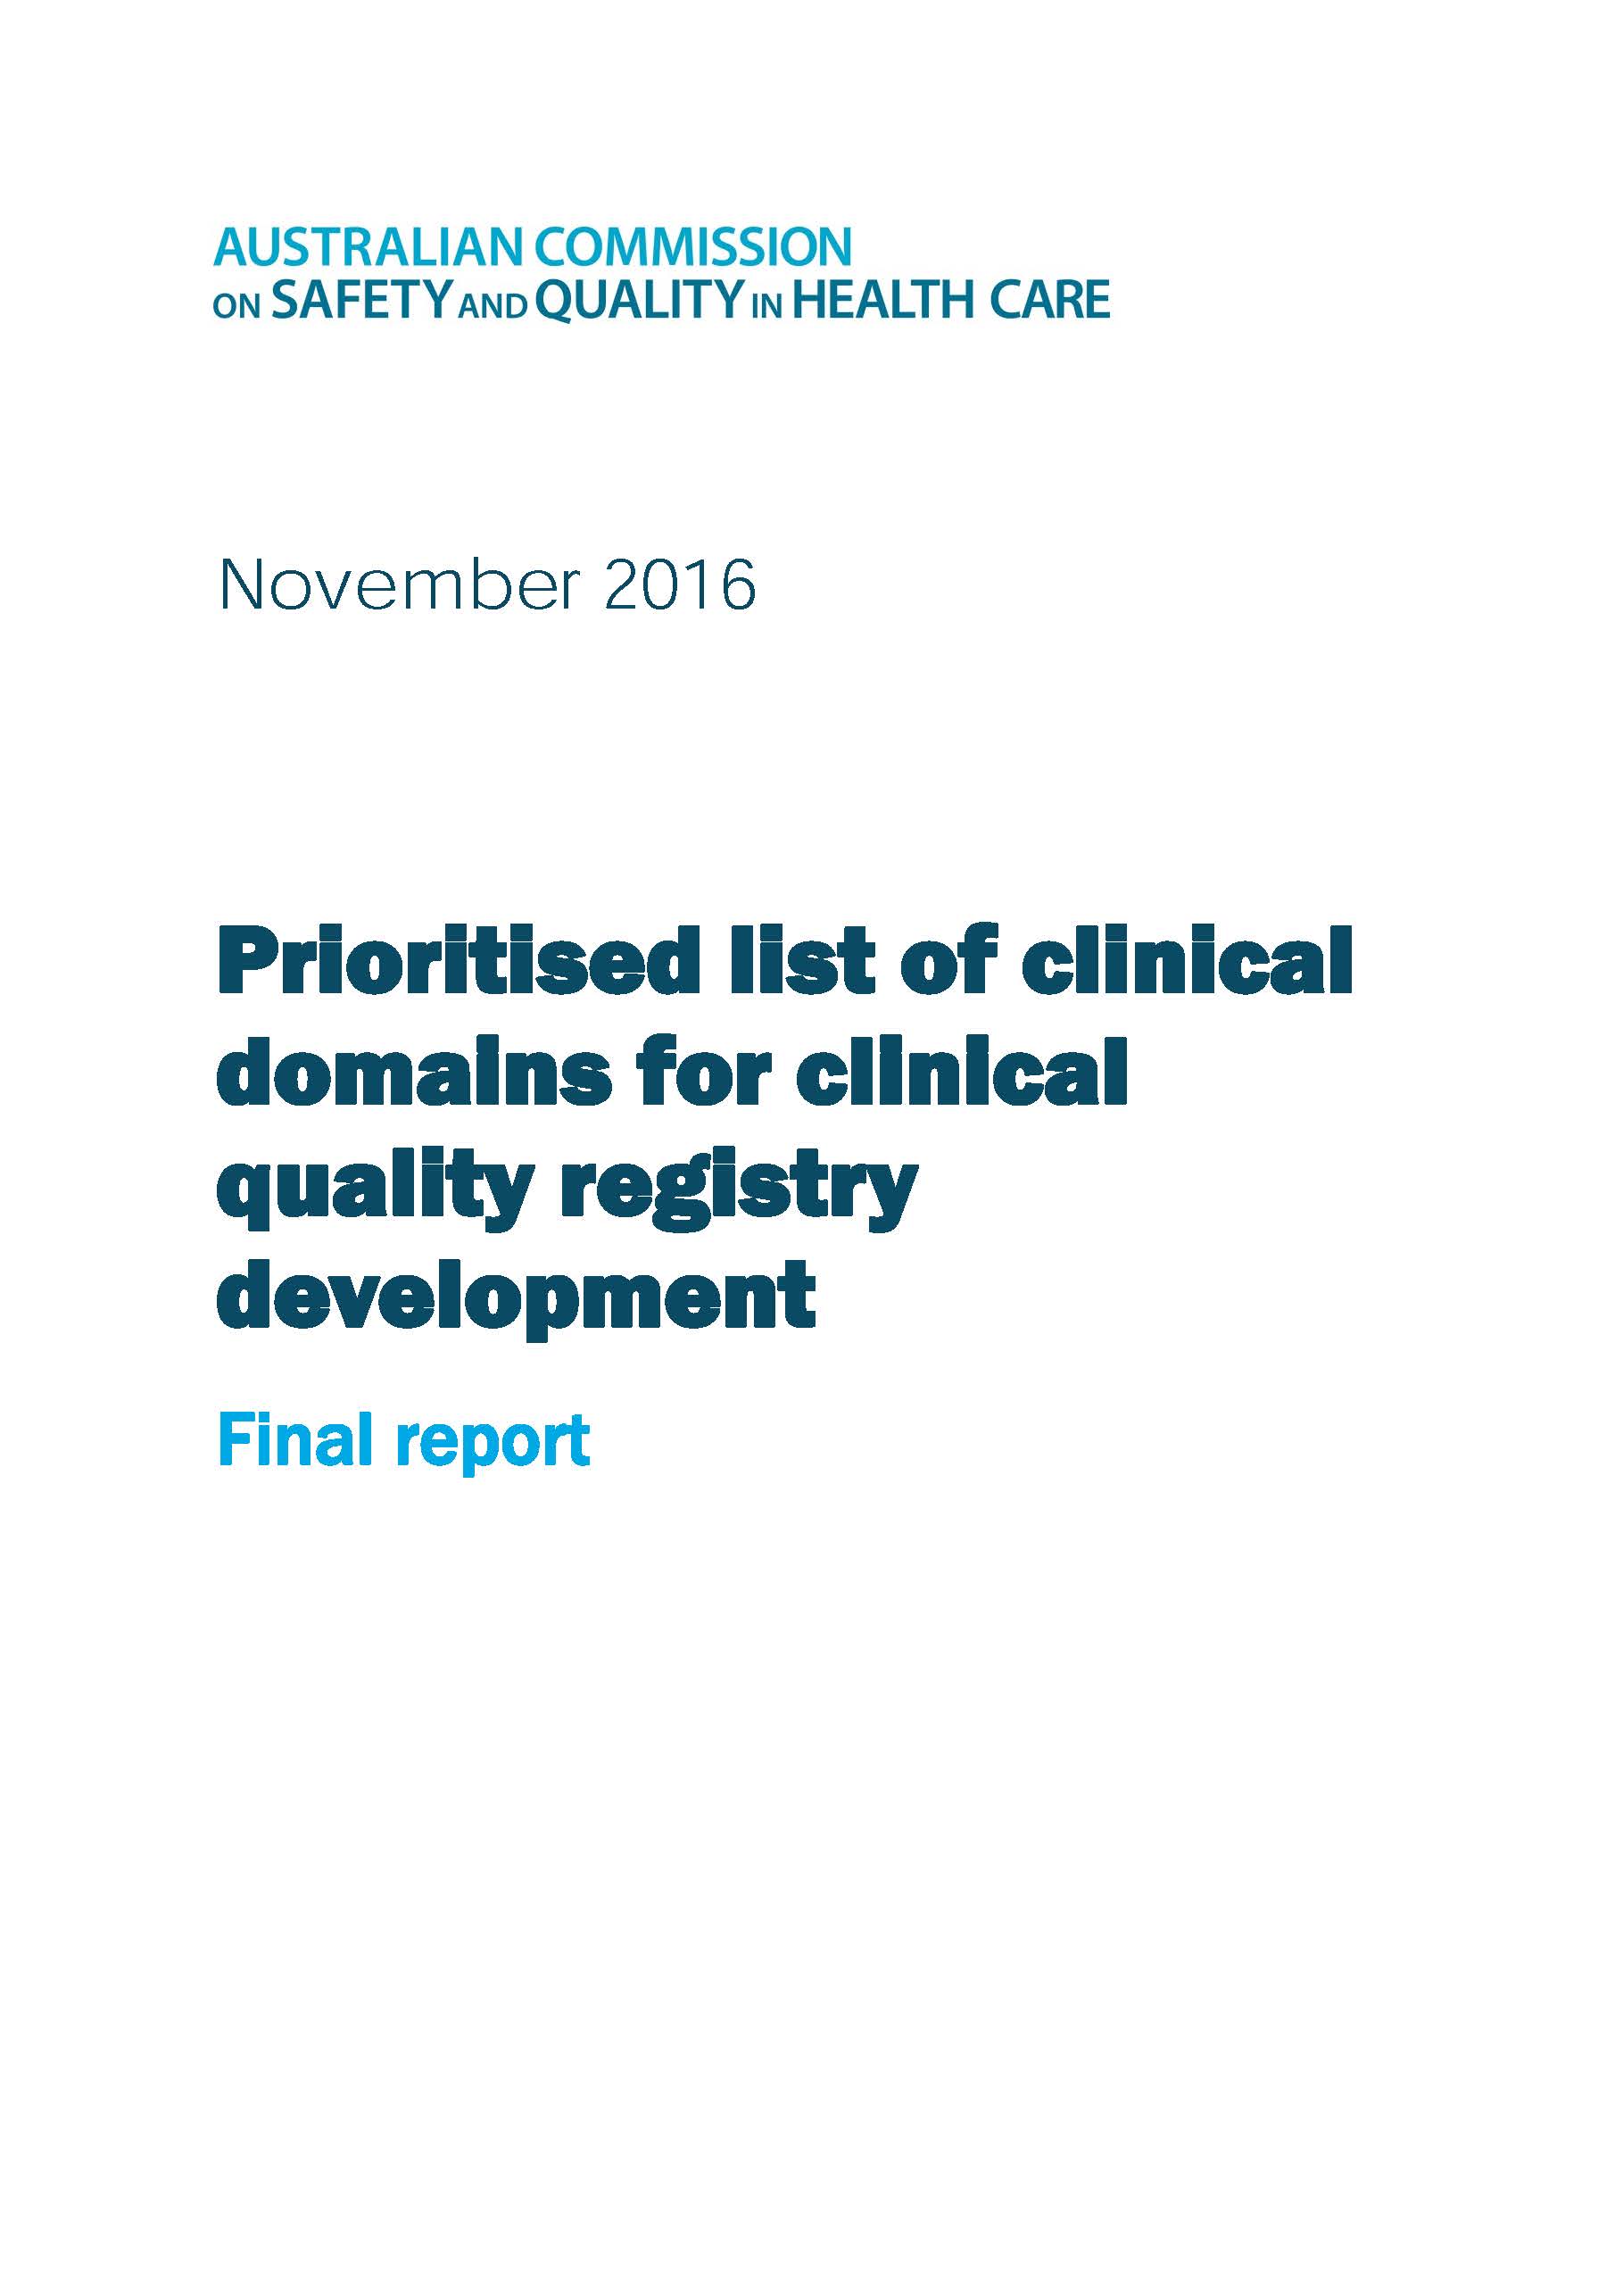 prioritised-list-of-clinical-domains-for-clinical-quality-registry-development.jpg